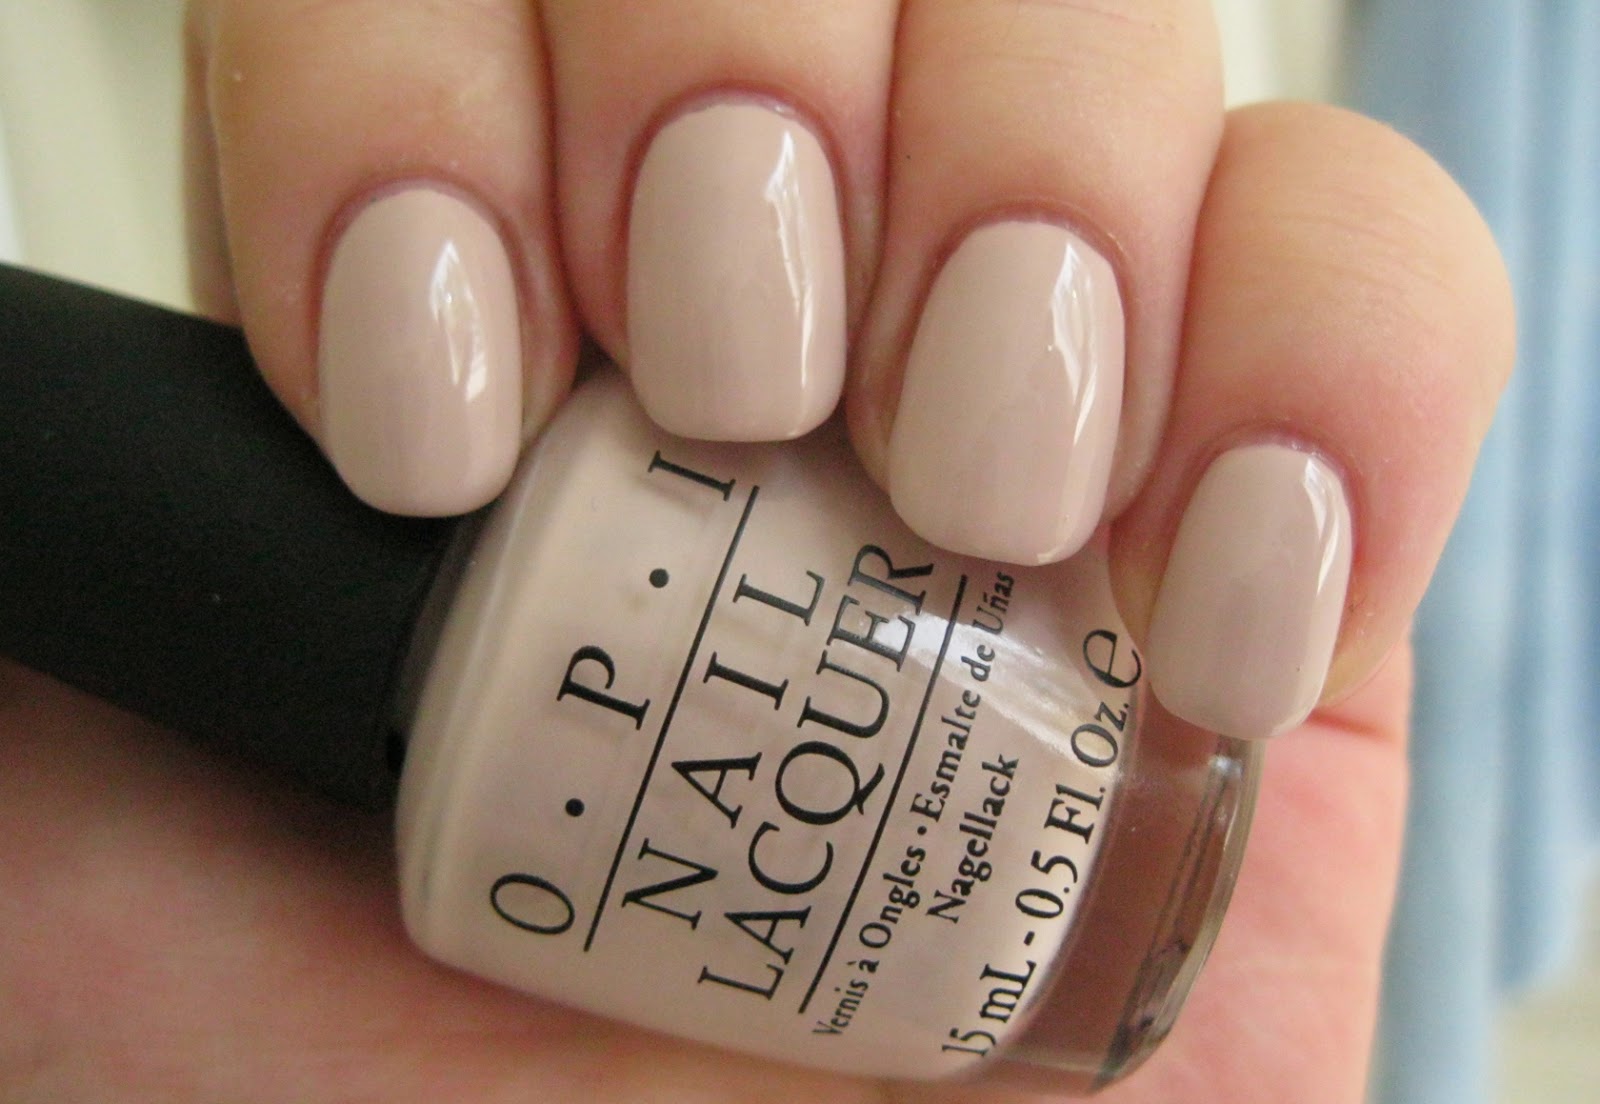 7. OPI GelColor in "Don't Bossa Nova Me Around" - wide 3